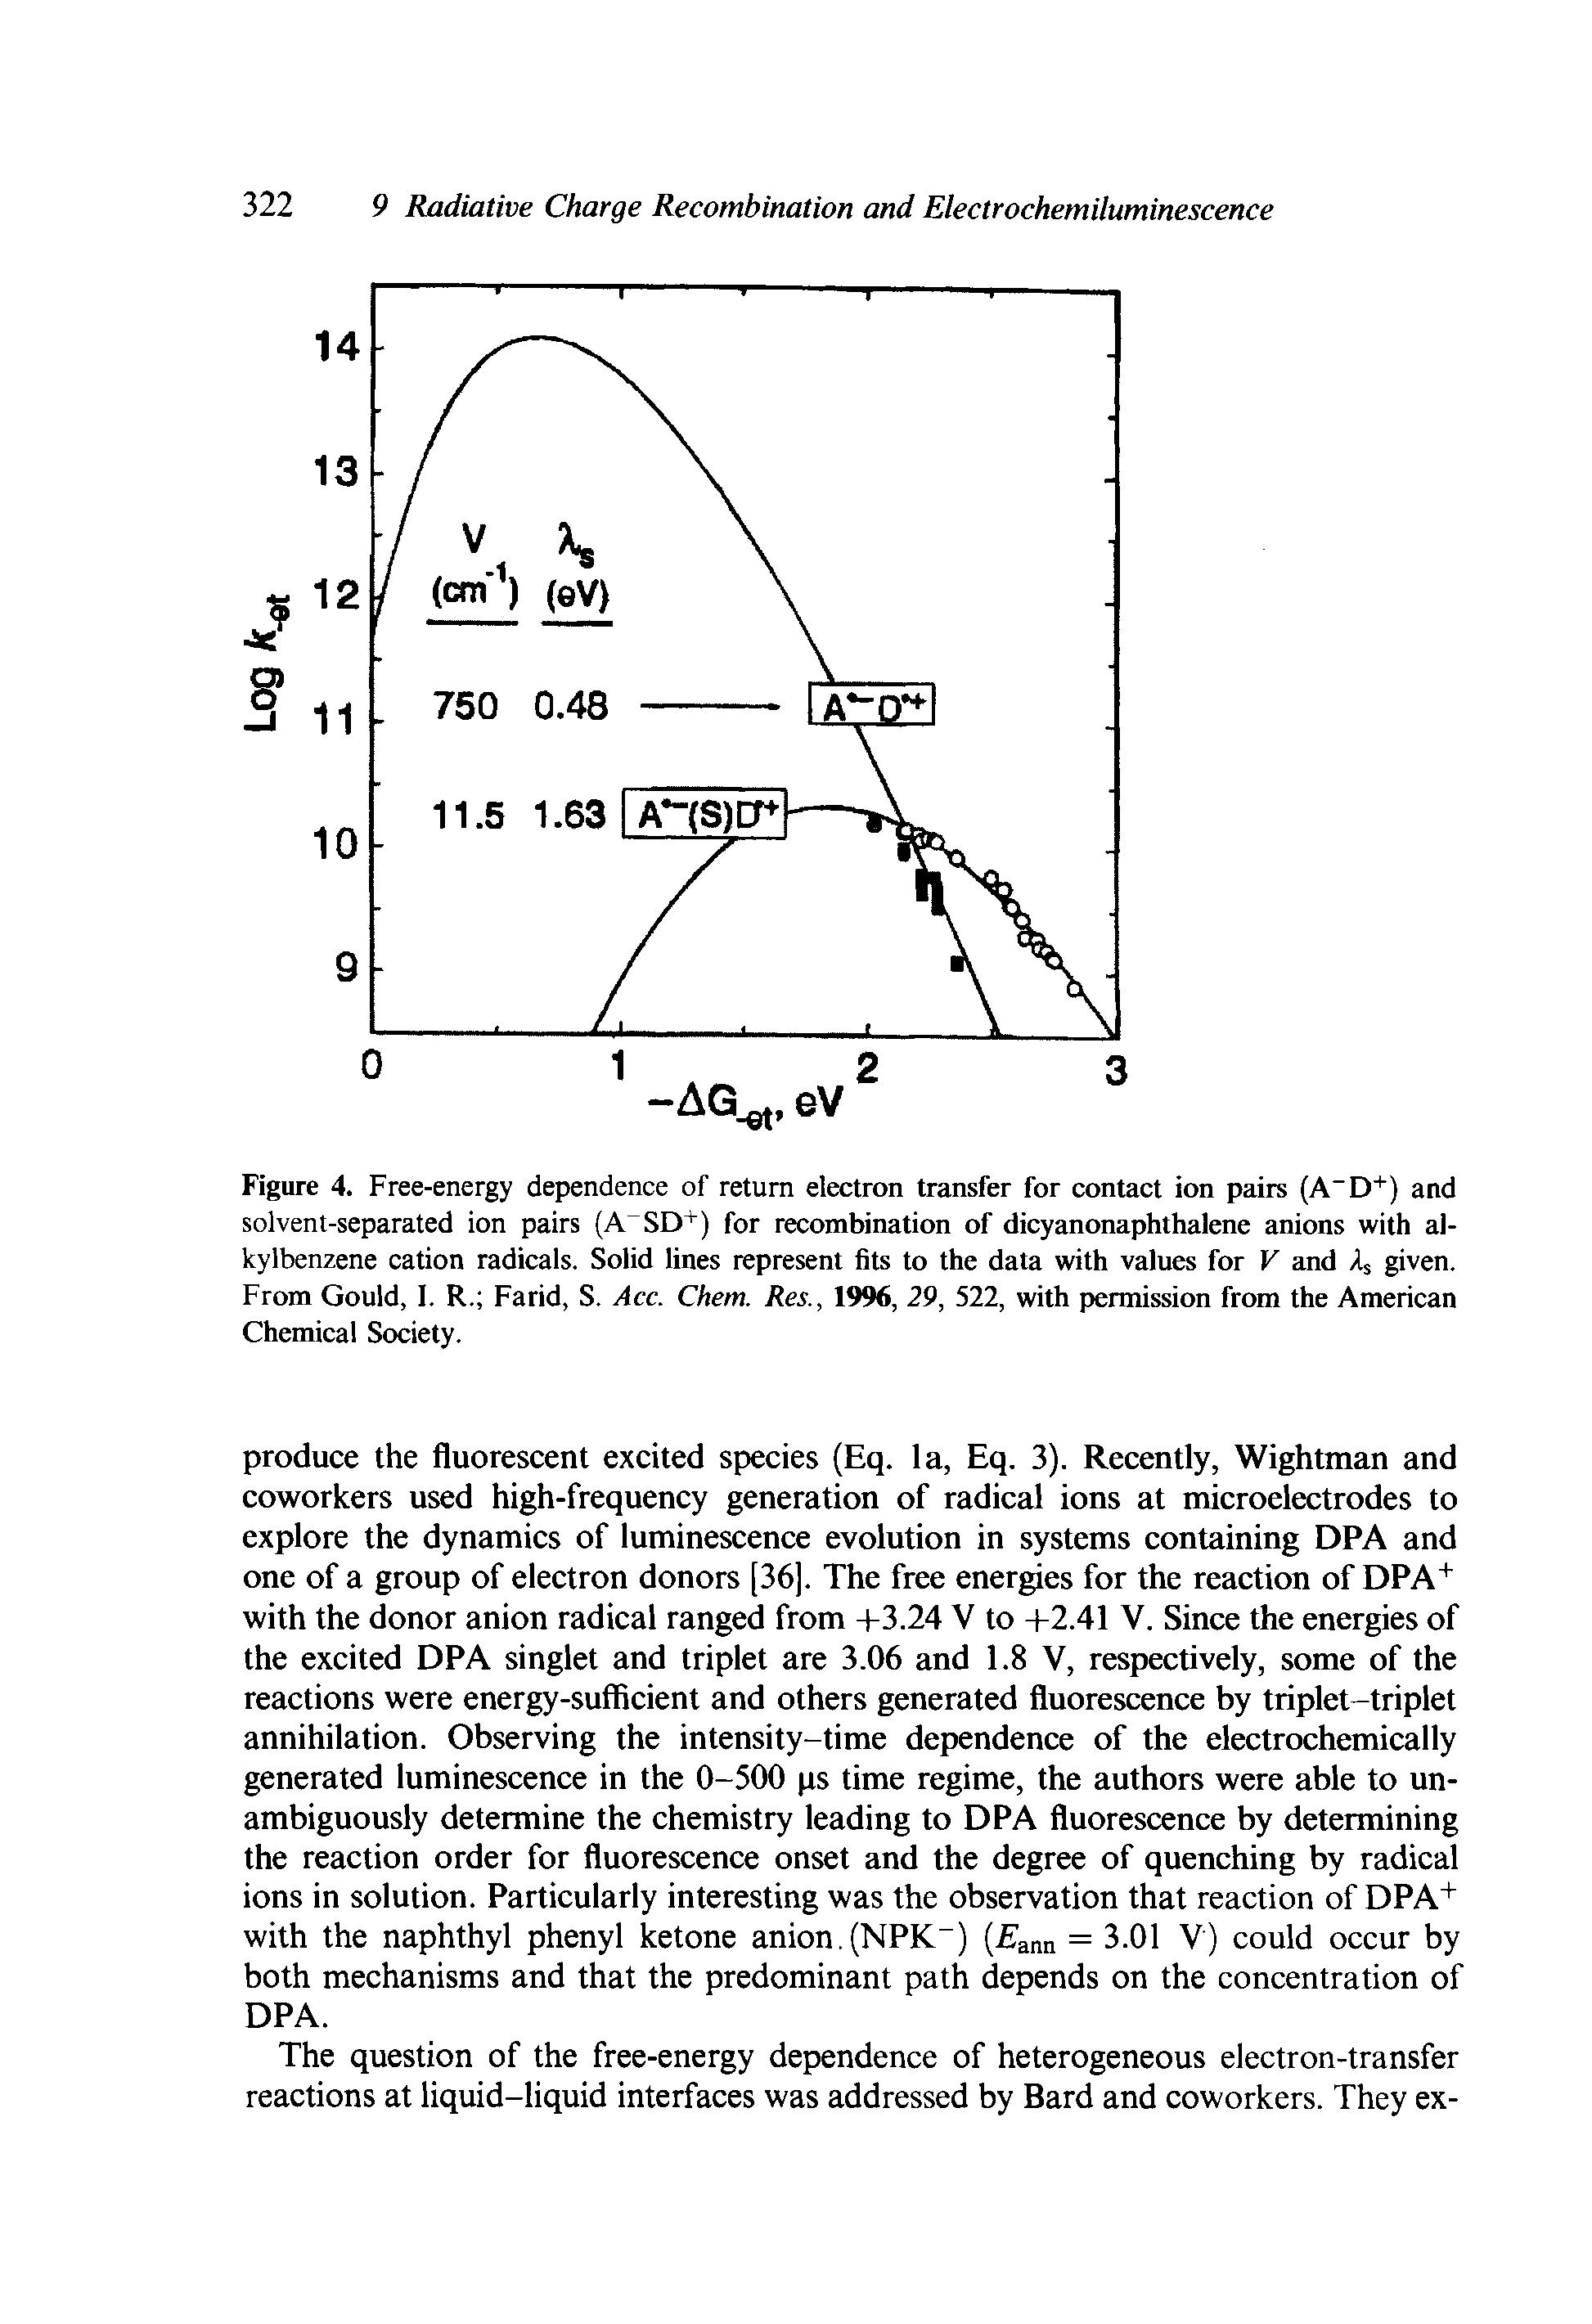 Figure 4. Free-energy dependence of return electron transfer for contact ion pairs (A D ) and solvent-separated ion pairs (A SD+) for recombination of dicyanonaphthalene anions with al-kylbenzene cation radicals. Solid lines represent fits to the data with values for V and Aj given. From Gould, I. R. Farid, S. Acc. Chem. Res., 1996, 29, 522, with permission from the American Chemical Society.